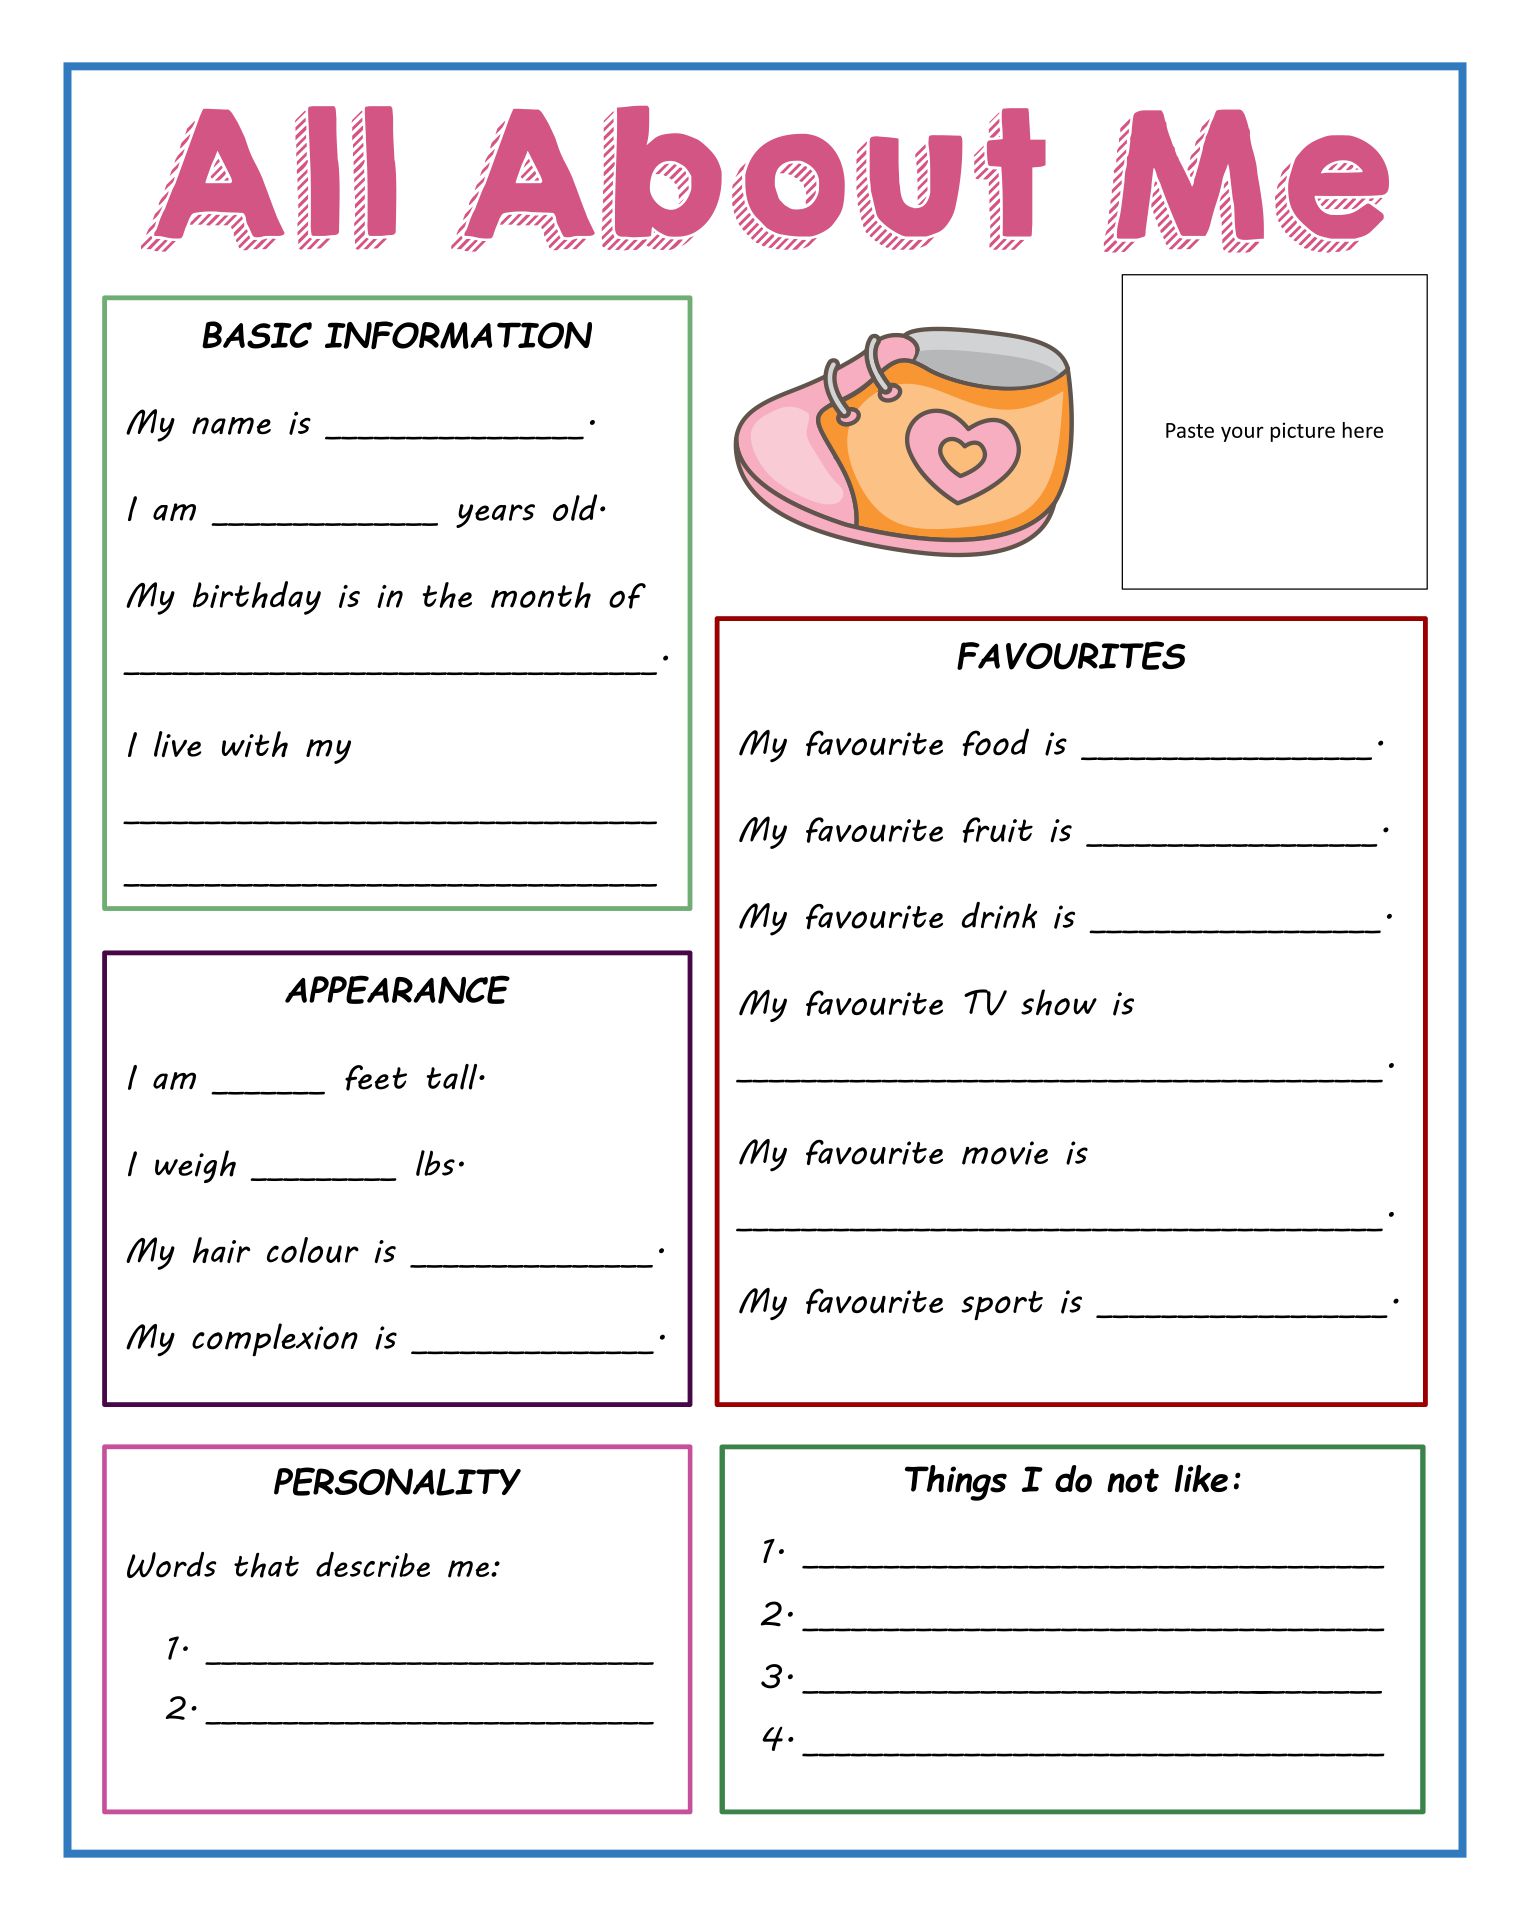 10-best-free-printable-all-about-me-form-for-high-school-printablee